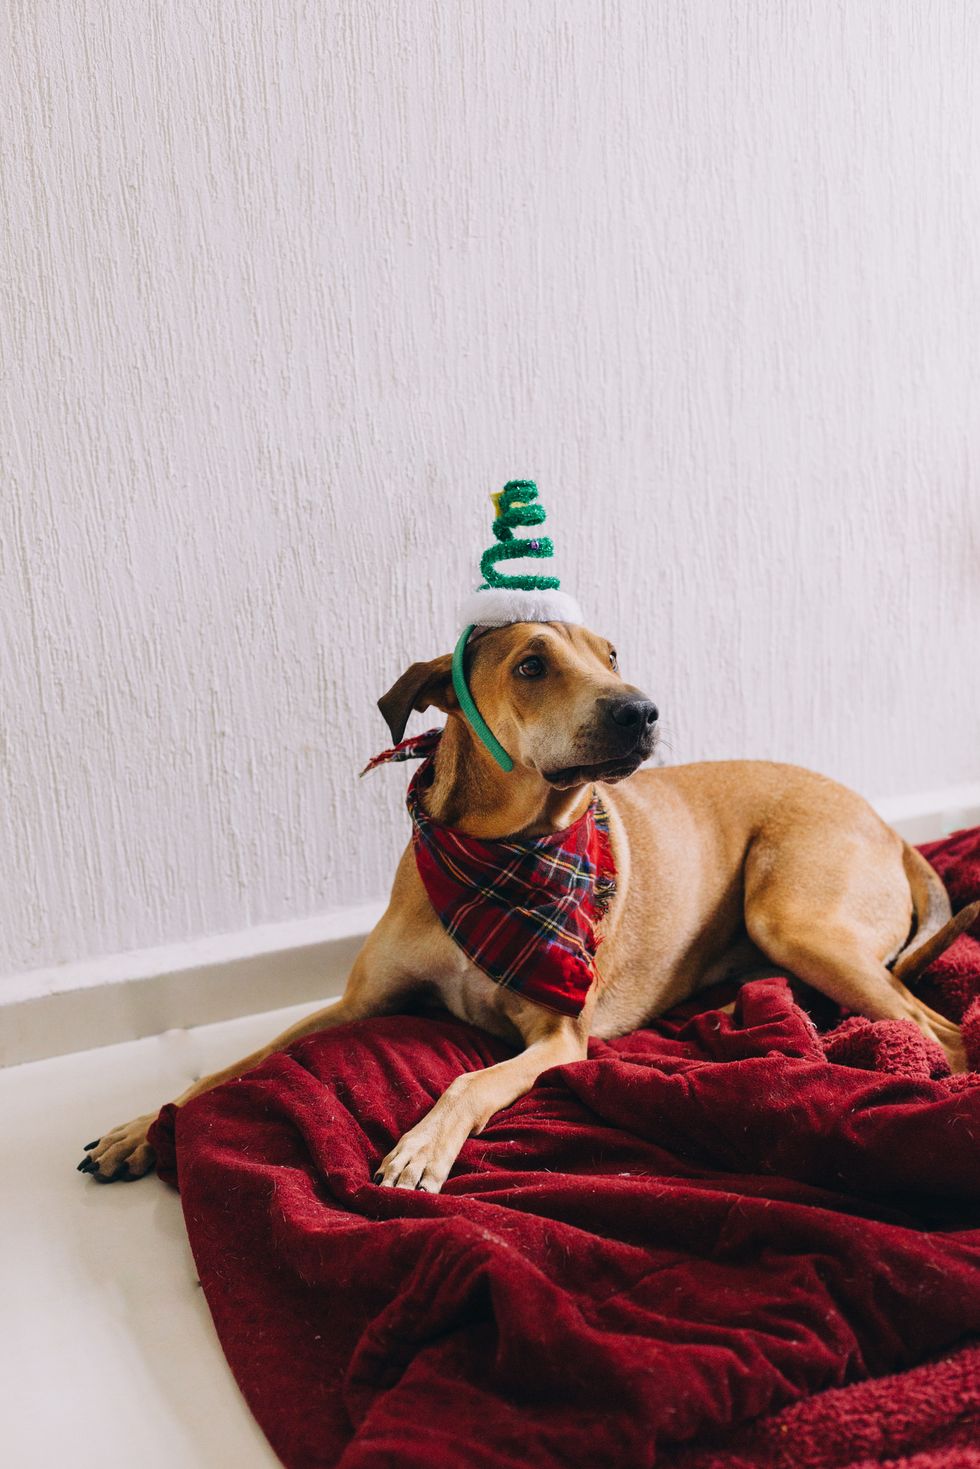 Festive Activities for You, Your Family And Your Dog